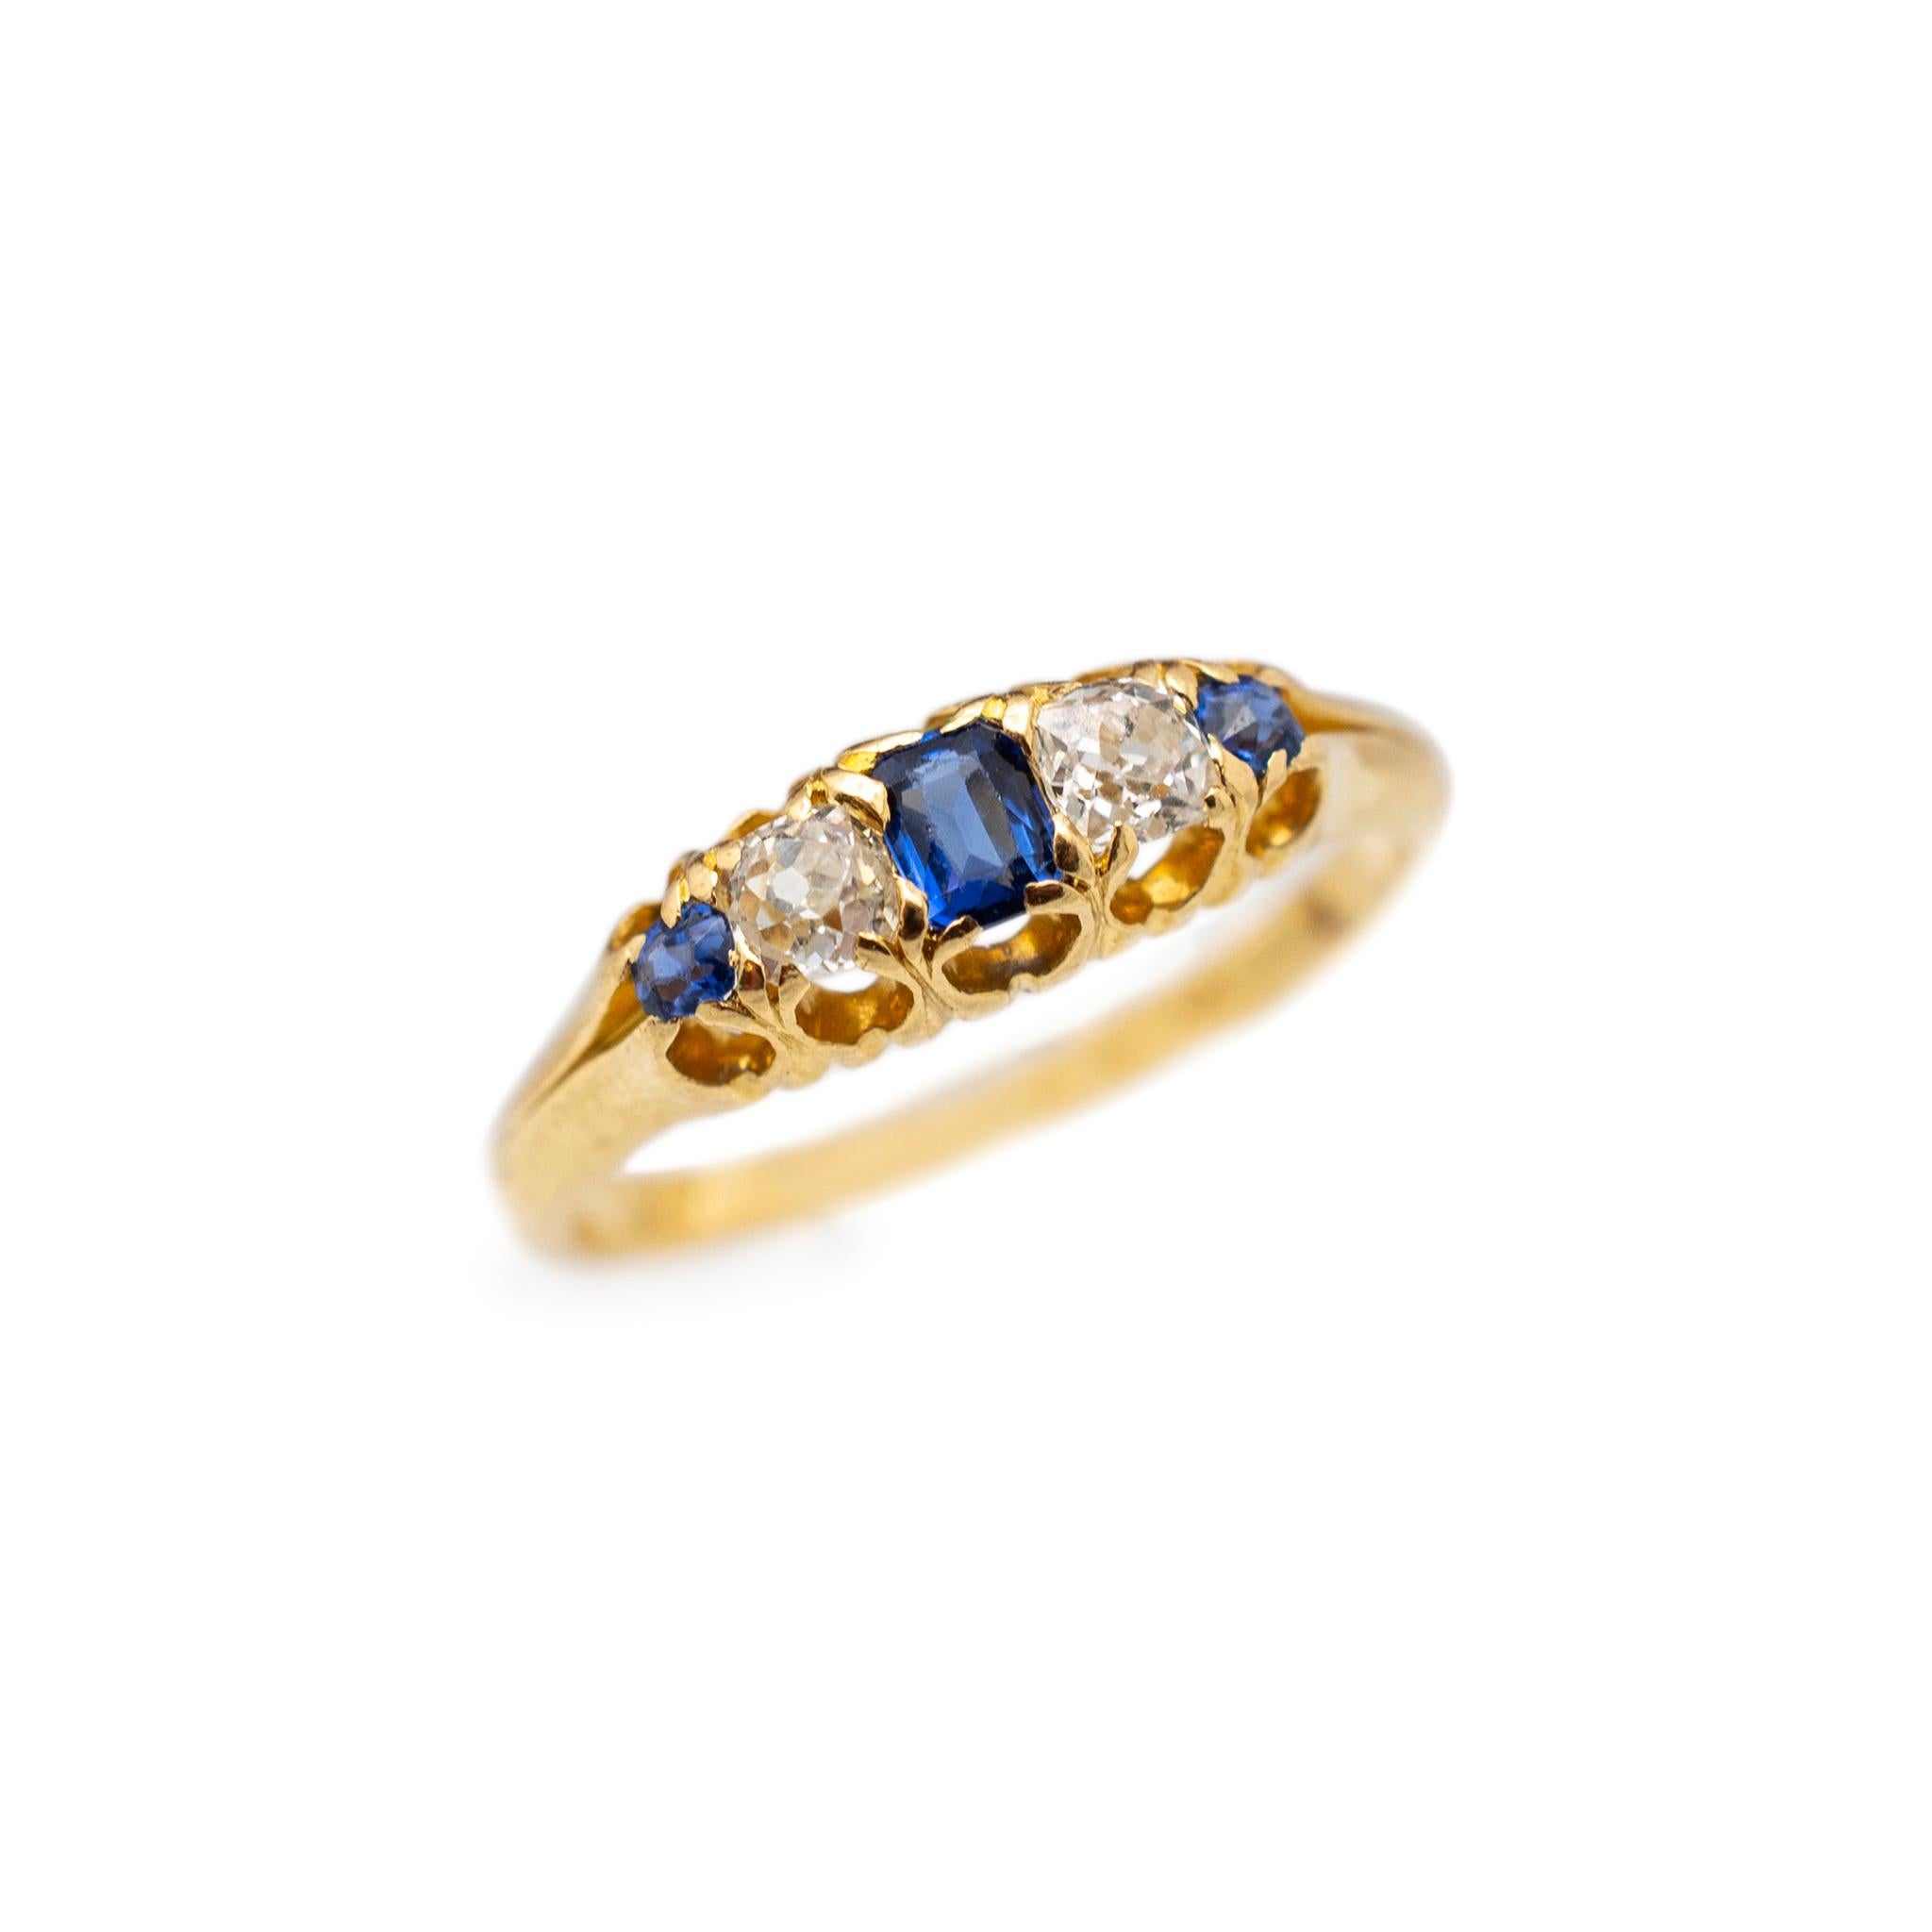 Gender: Ladies

Metal Type: 18K Yellow Gold

Size: 6

Shank Maximum Width: 5.20 mm tapering to 1.60 mm

Weight: 2.88 grams

Ladies 18K yellow gold diamond and sapphire antique cocktail ring with a half round shank.

Antique. Pre-owned in excellent